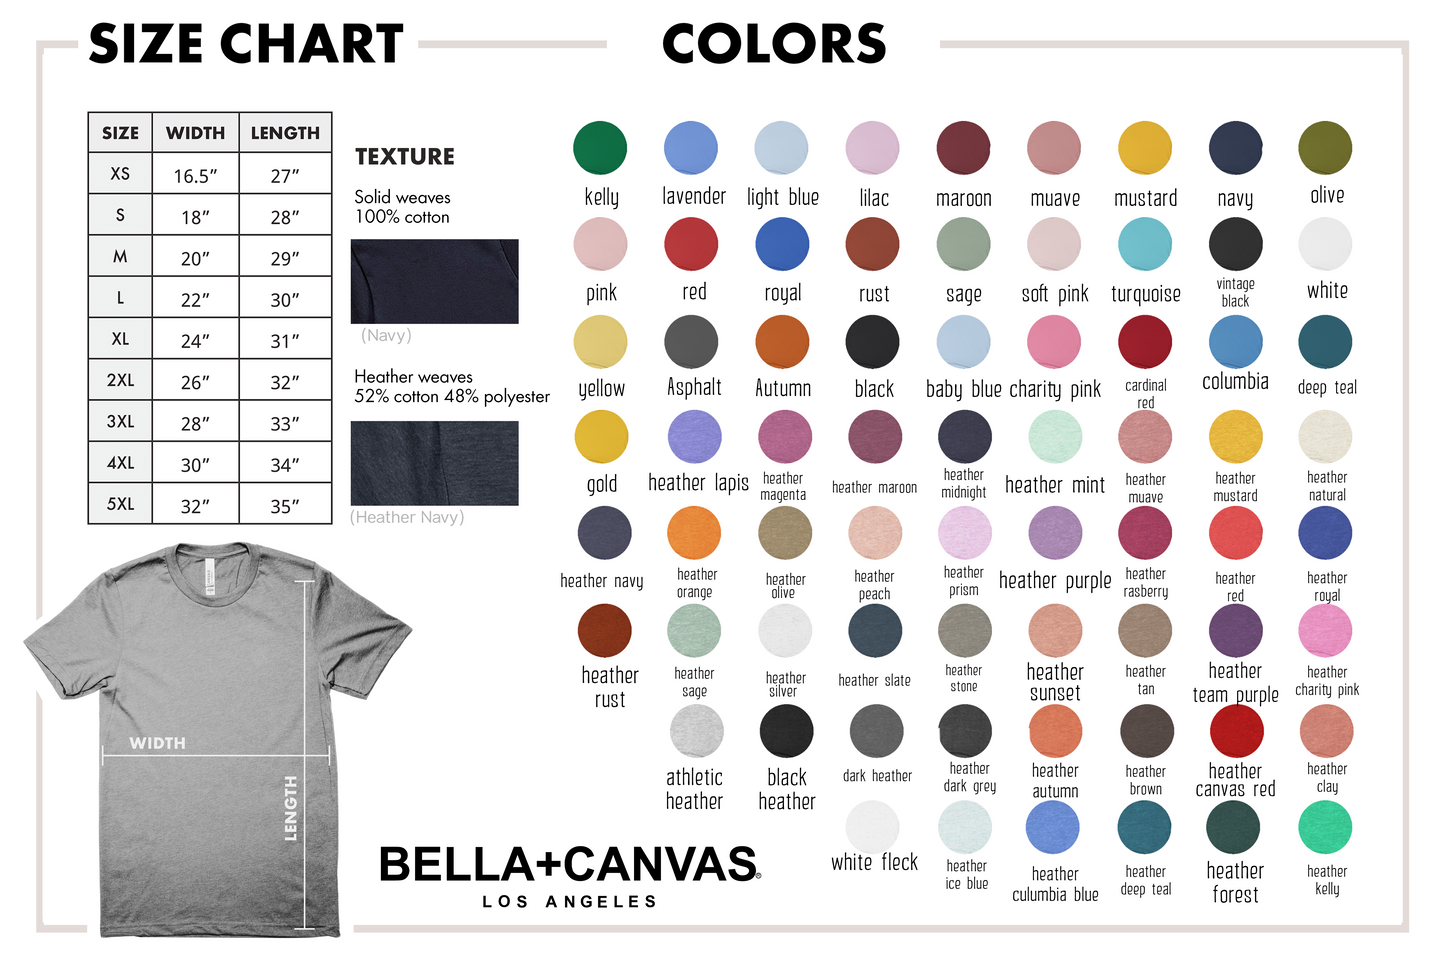 Connecticut Softball Tshirt - Bella Canvas (lots of color choices)